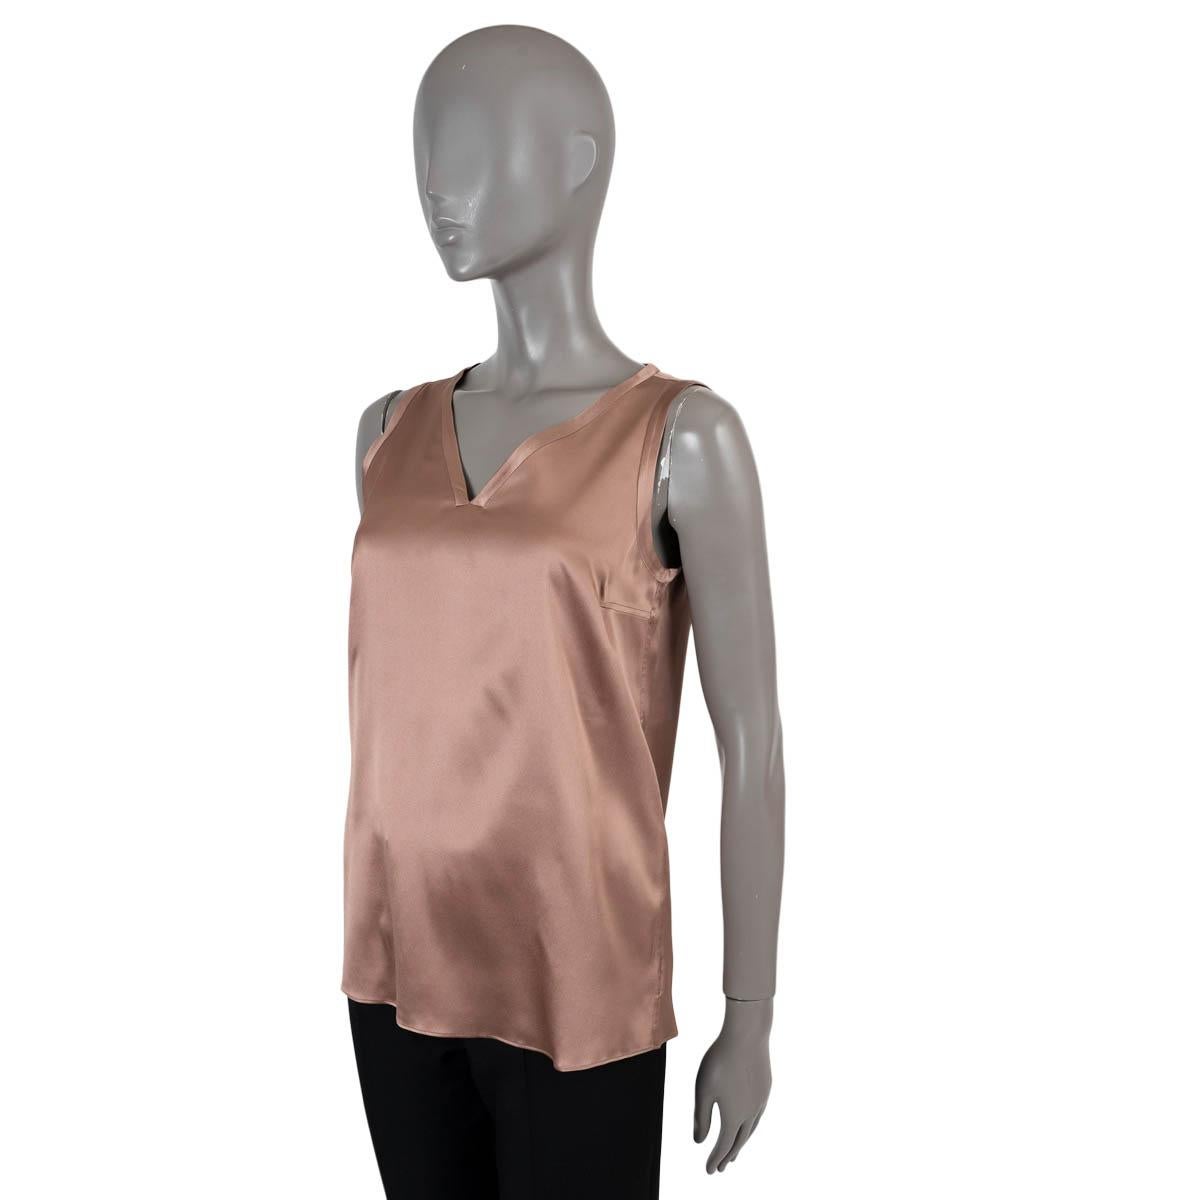 100% authentic Brunello Cucinelli satin tank-top in dusty rose stretch silk (with 4% elastane). Has been worn and is in excellent condition. 

Measurements
Tag Size	S
Size	S
Shoulder Width	34cm (13.3in)
Bust From	88cm (34.3in)
Waist From	92cm